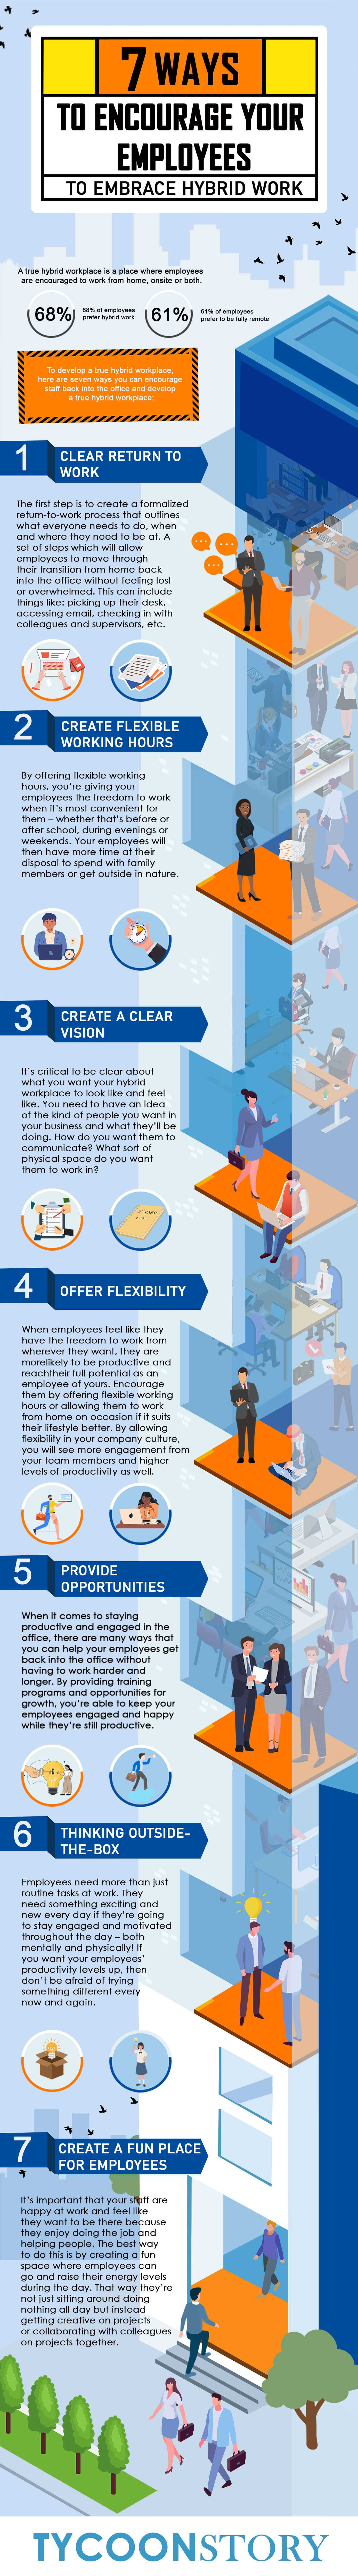 7 ways to encourage staff back into the office and develop a true hybrid workplace